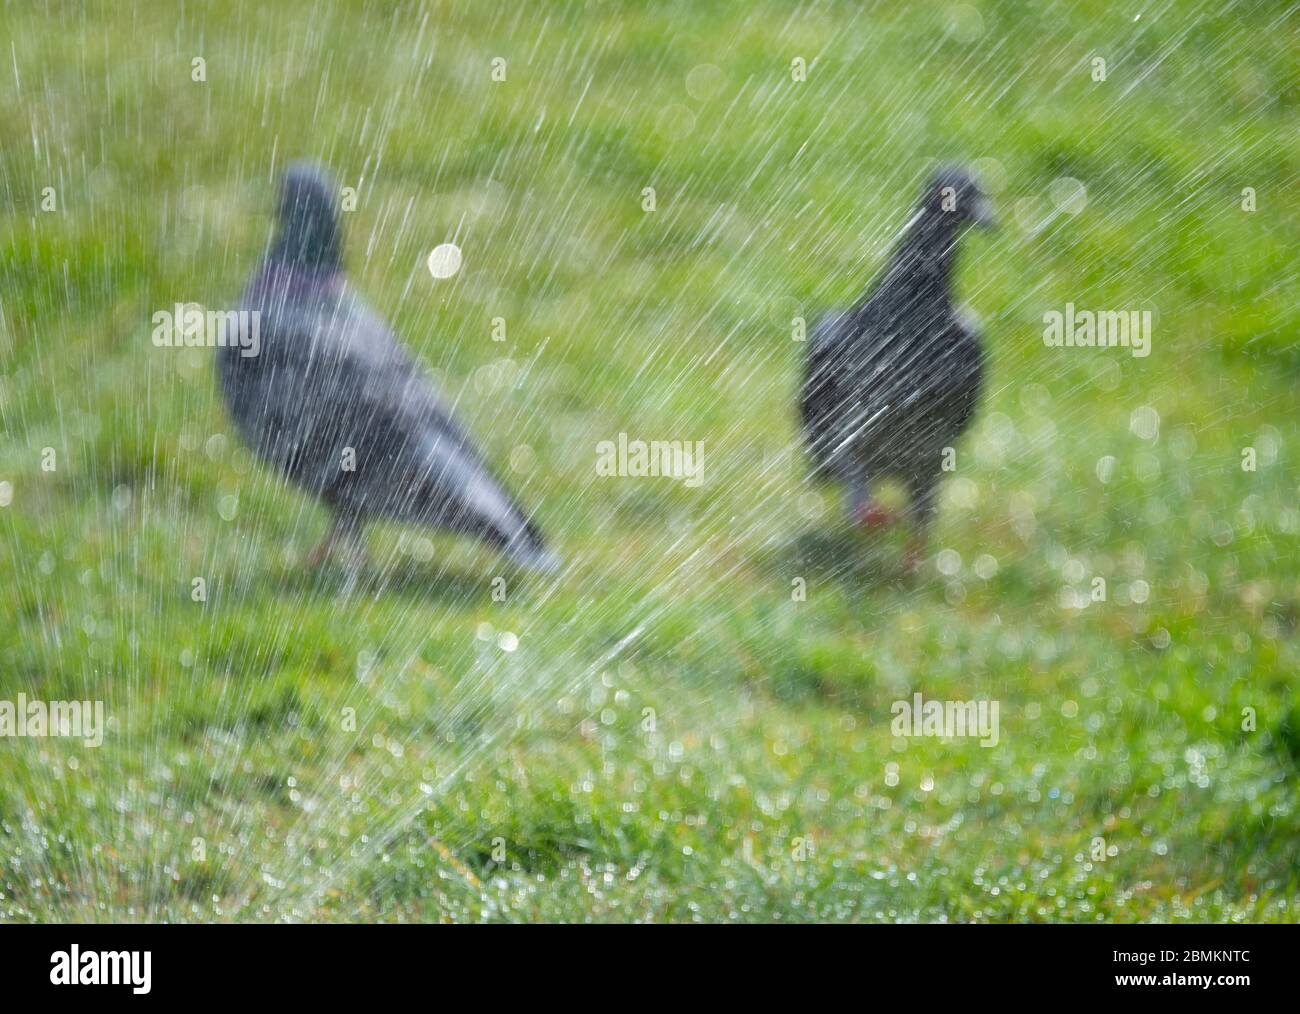 London, UK. 10 May 2020. A garden sprinkler waters a lawn in a London garden after days or dry weather, with no immediate prospect of rain forecast. Pigeons make the most of it by having an impromptu bath and shower. Credit: Malcolm Park/Alamy Live News. Stock Photo